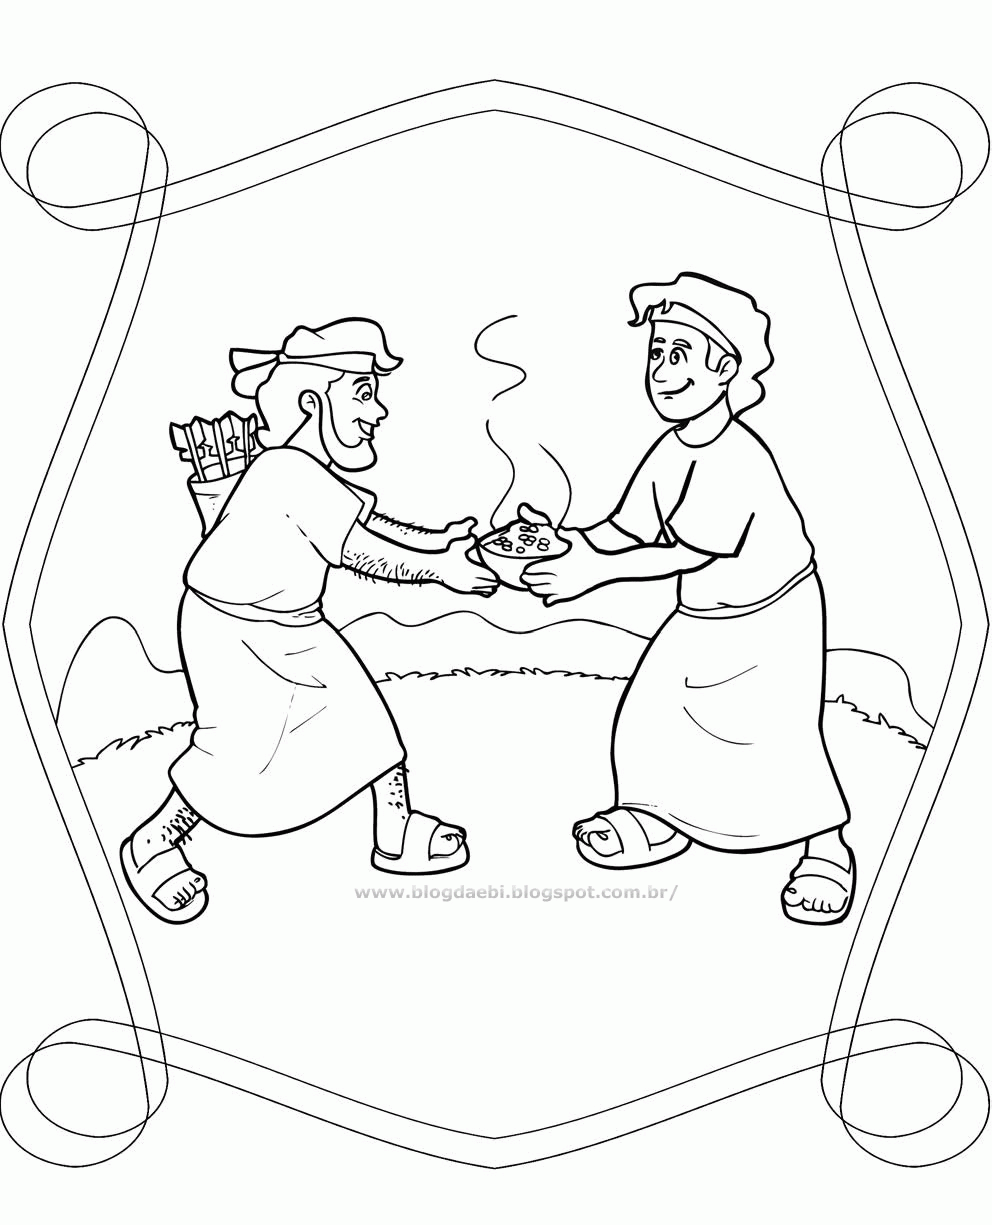 jacob and esau coloring pages 17 best images about bible story jacob and esau on esau and coloring pages jacob 